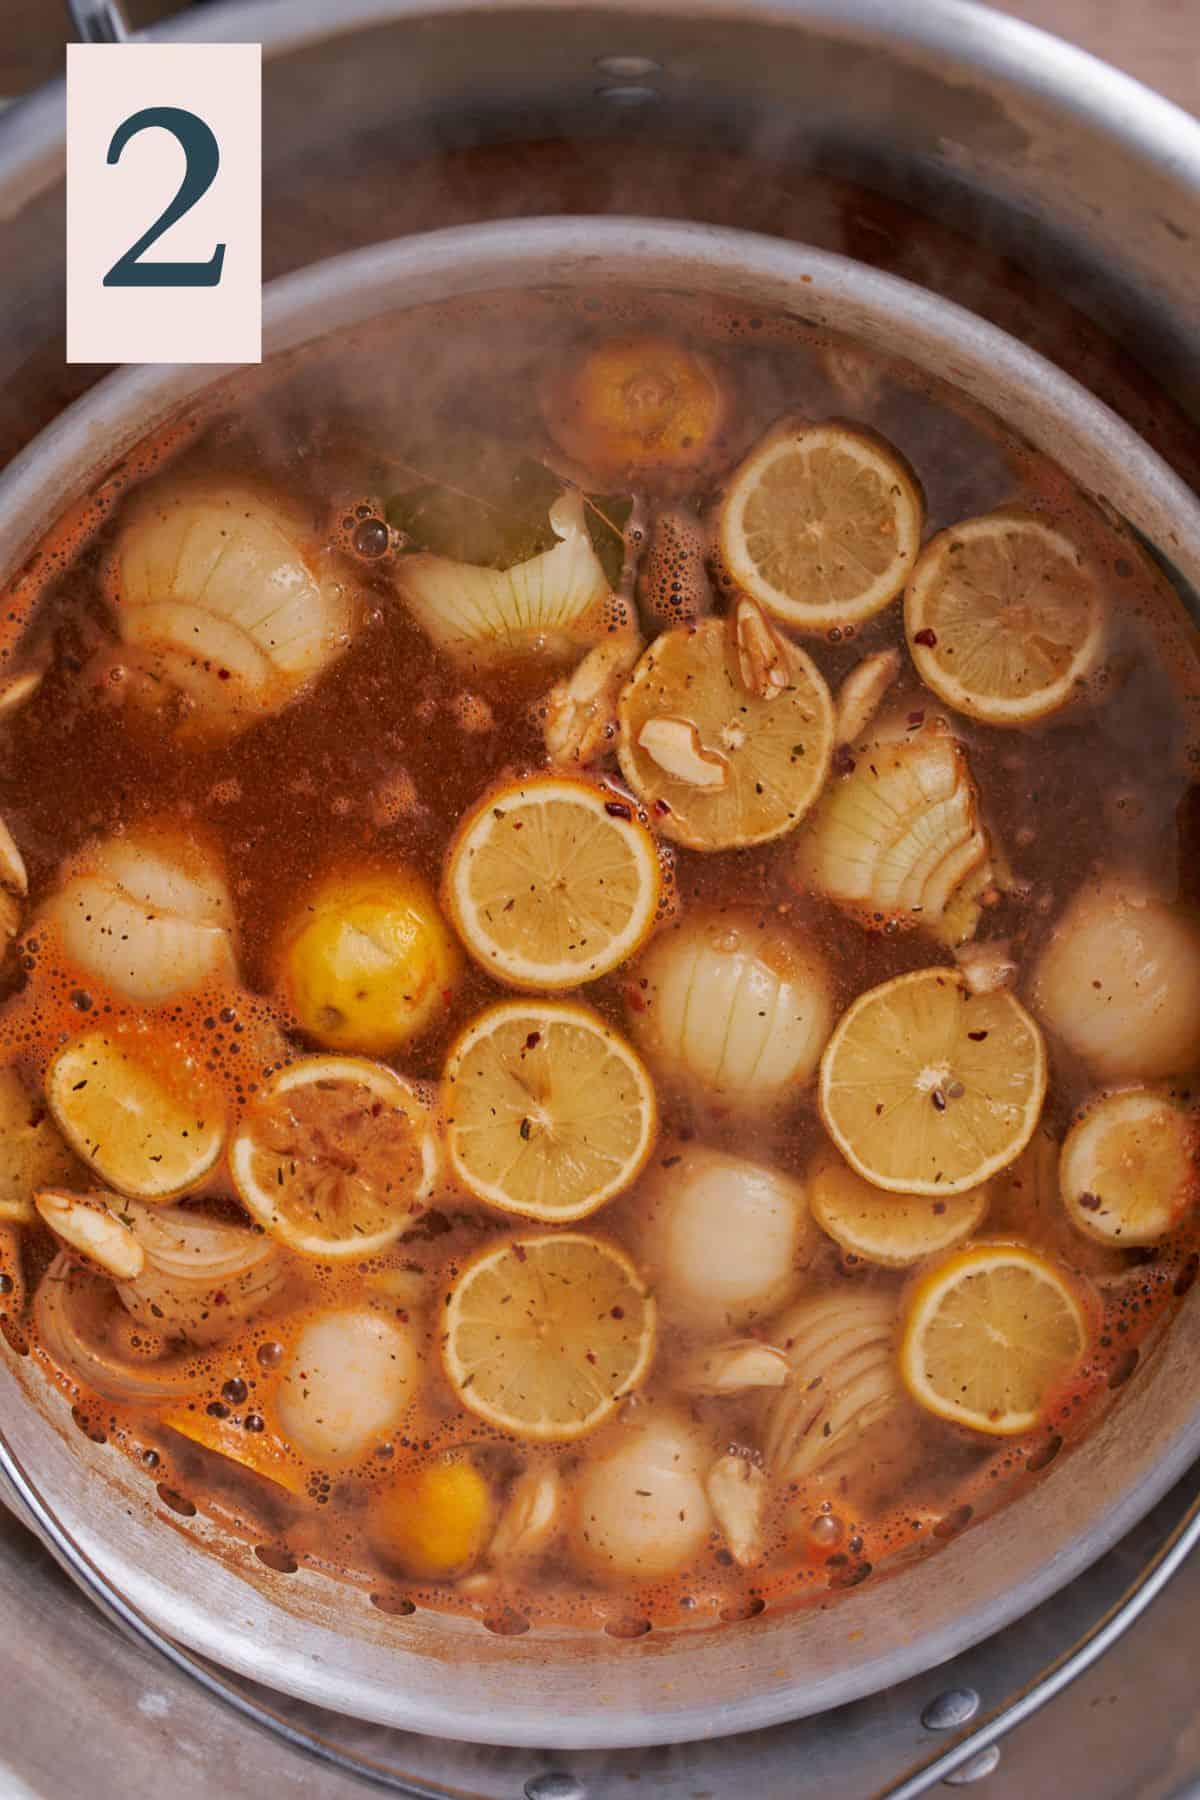 Large stock pot filled with seasoned water with onions, lemon slices, bay leaves, and spicy seasonings.